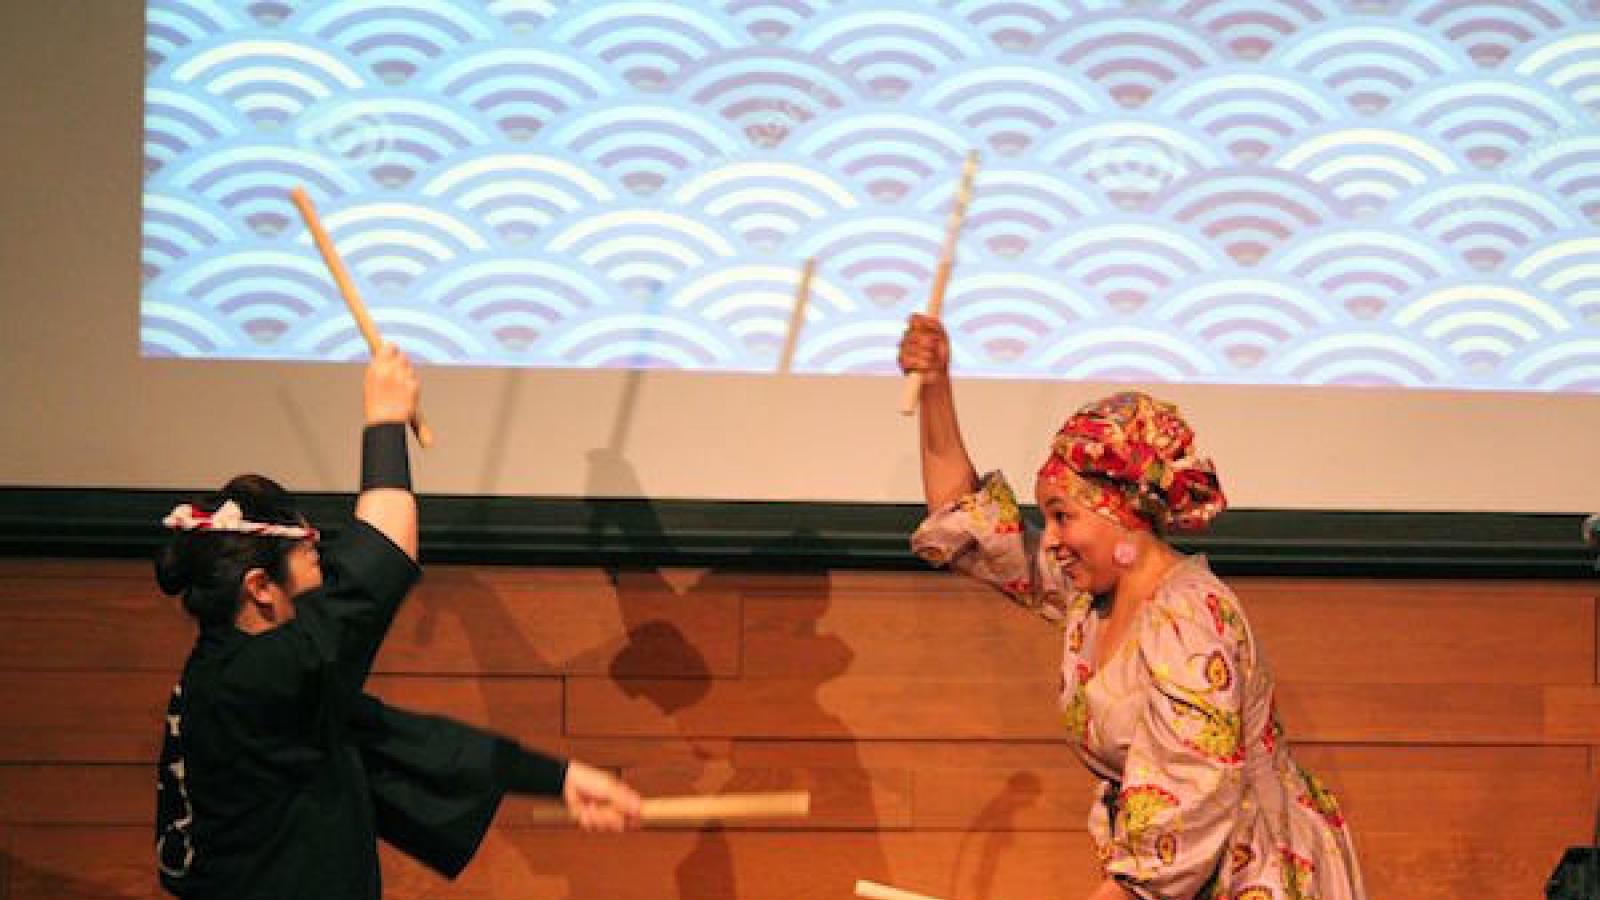 two women play a taiko drum standing on either side of it